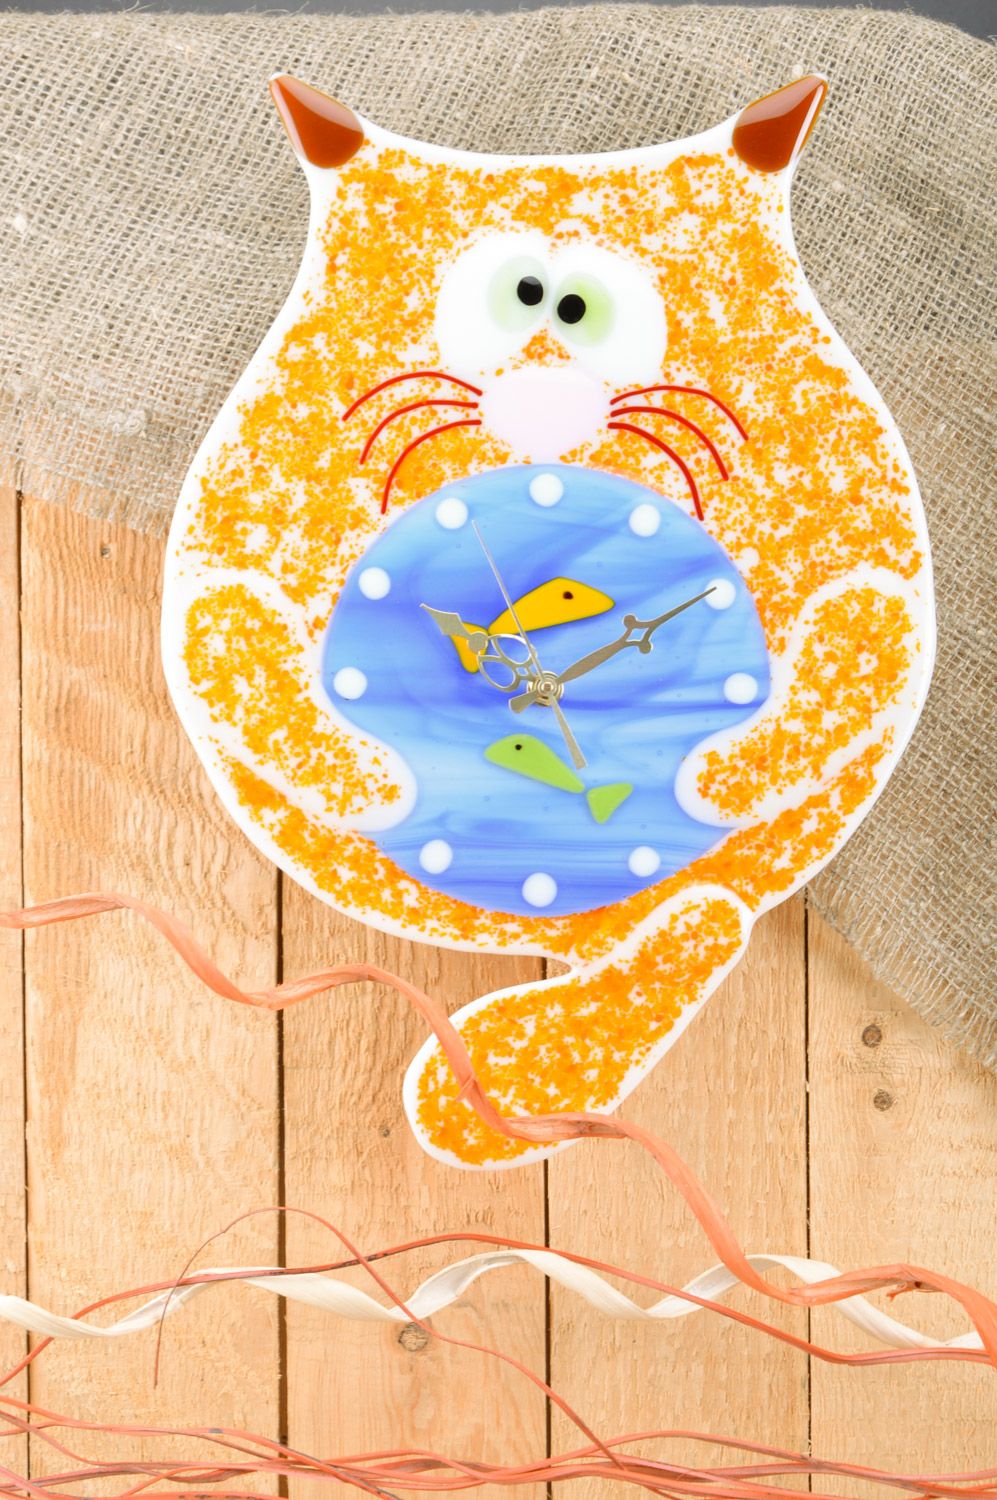 Funny handmade fused glass wall clock in the shape of fat cat for child's room photo 1